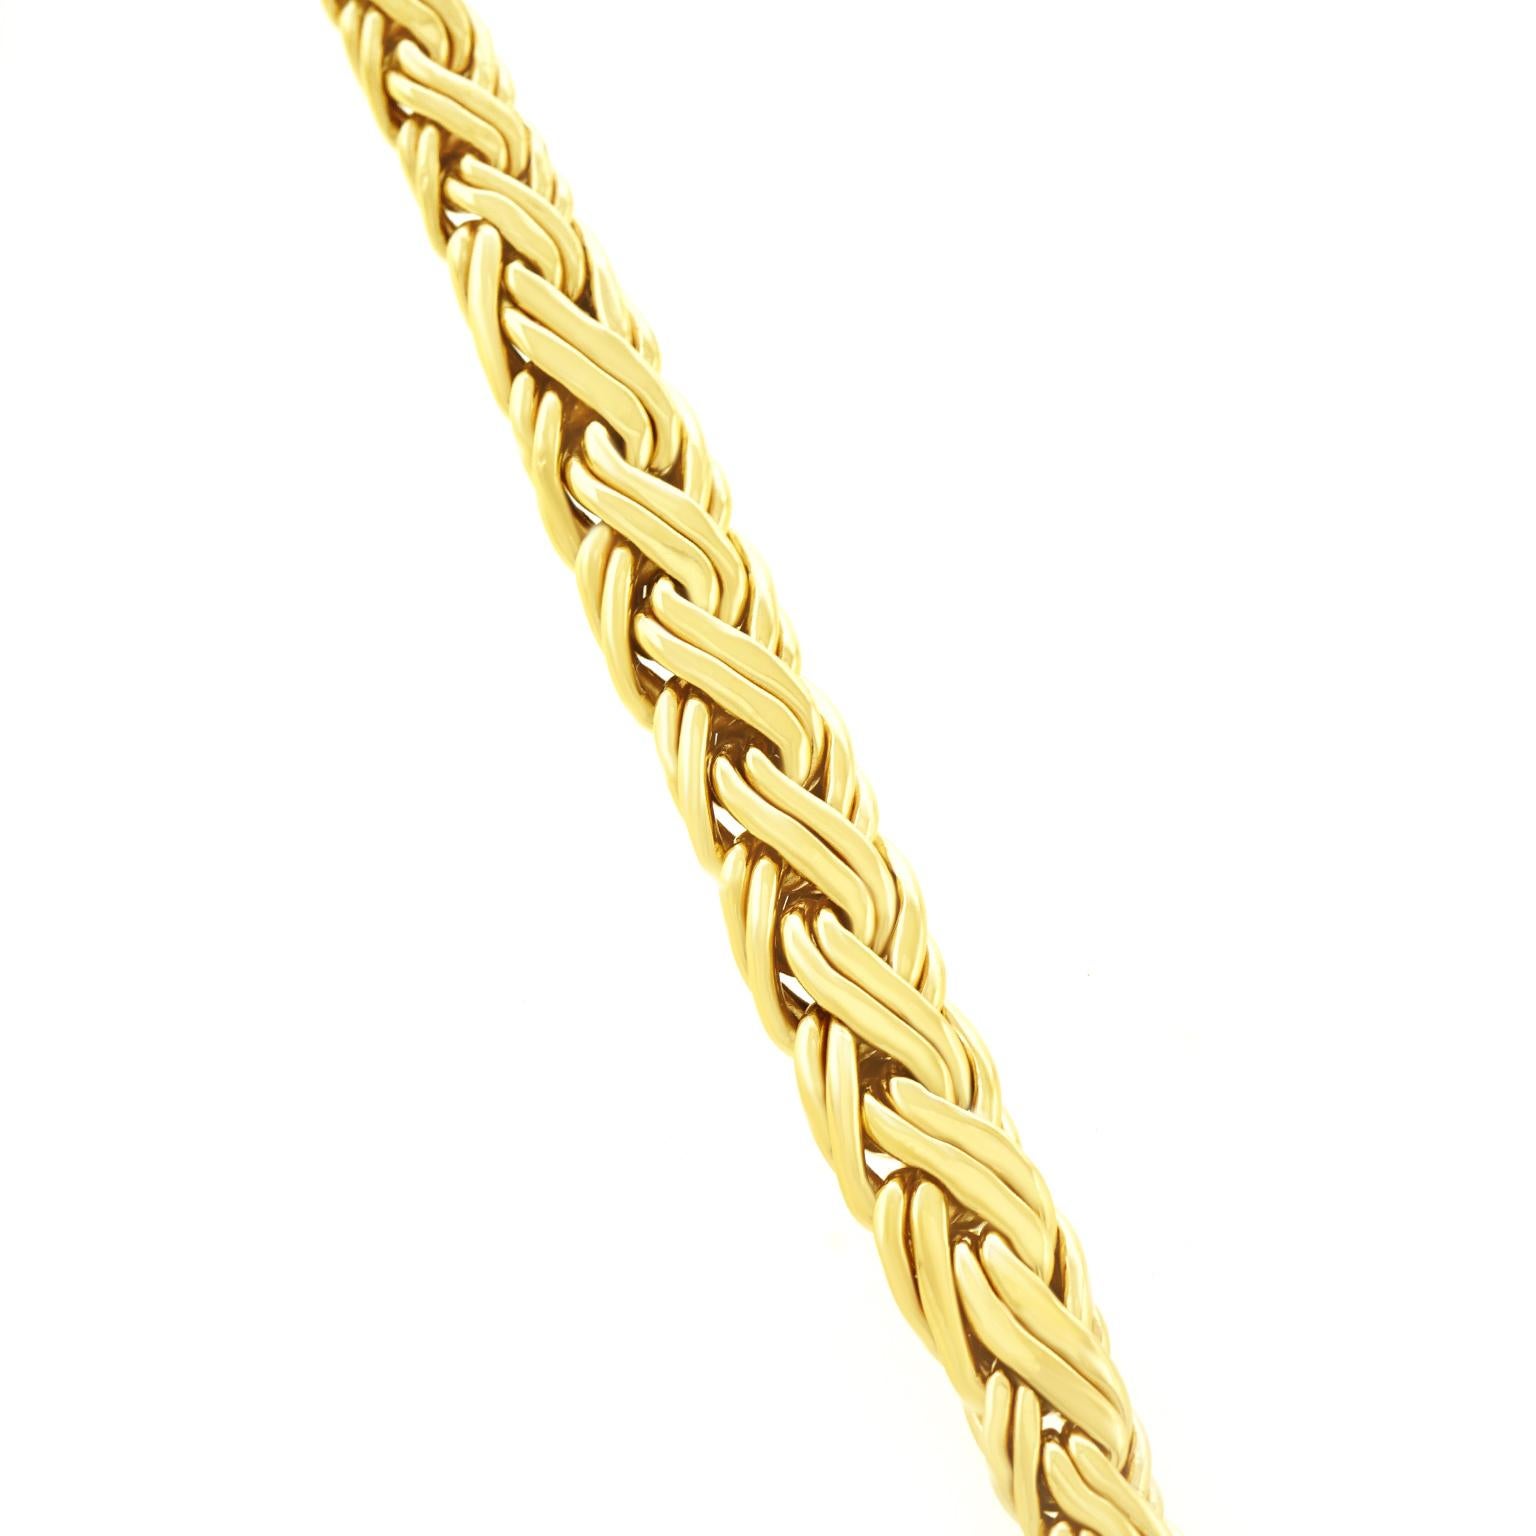 Women's Tiffany & Co. Gold Russian Braid Necklace